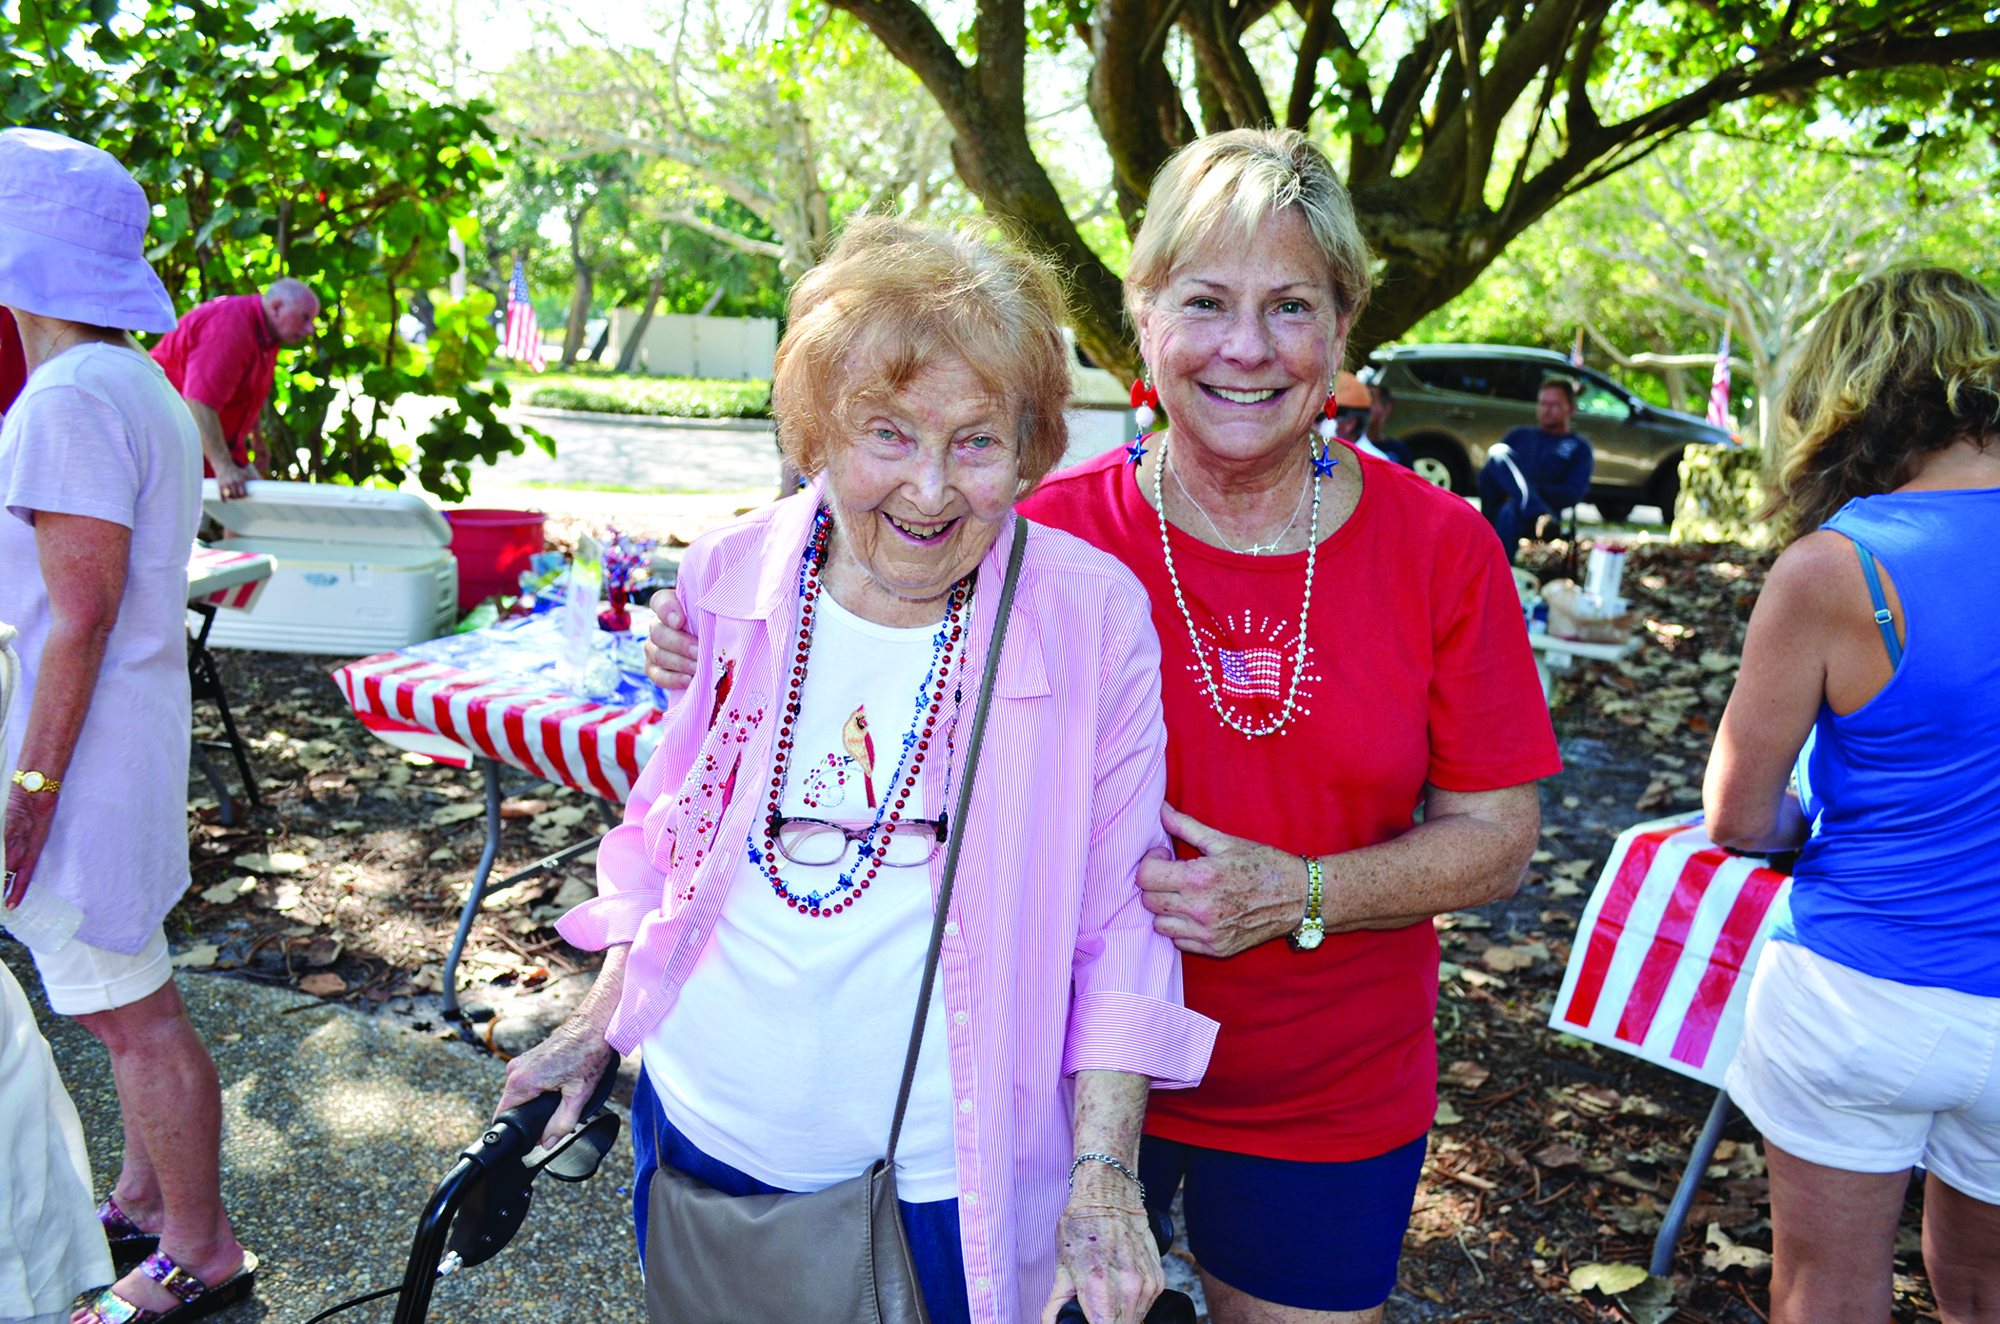 Virginia Sanders and Chamber of Commerce President Gail Loefgren at last year's Freedom Fest